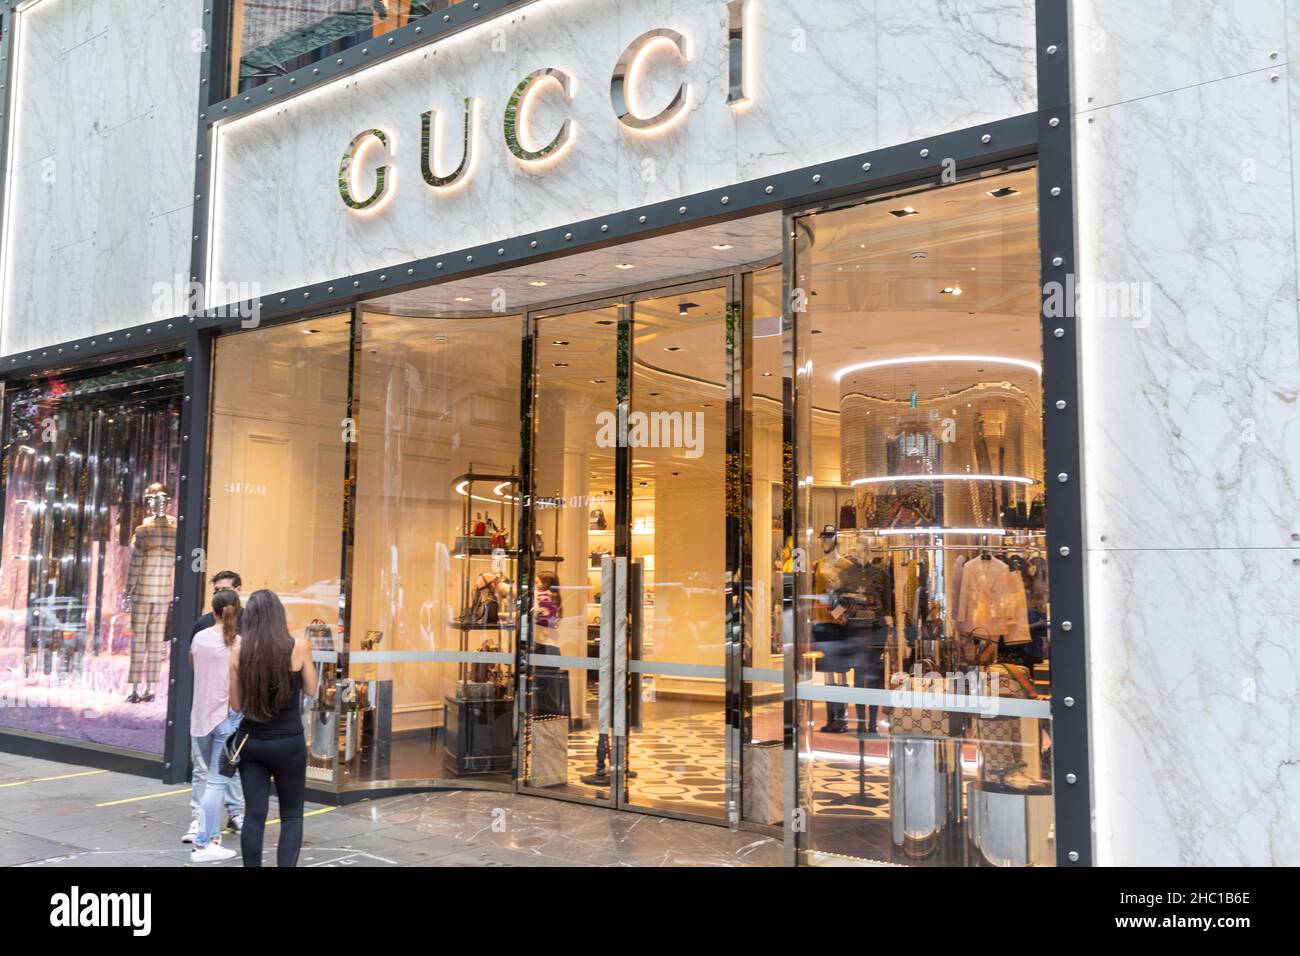 With covid cases rising significantly over the past week, the city was  quiet with few shoppers braving the stores with majority of people wearing  facemasks to protect against virus transmission. Gucci store